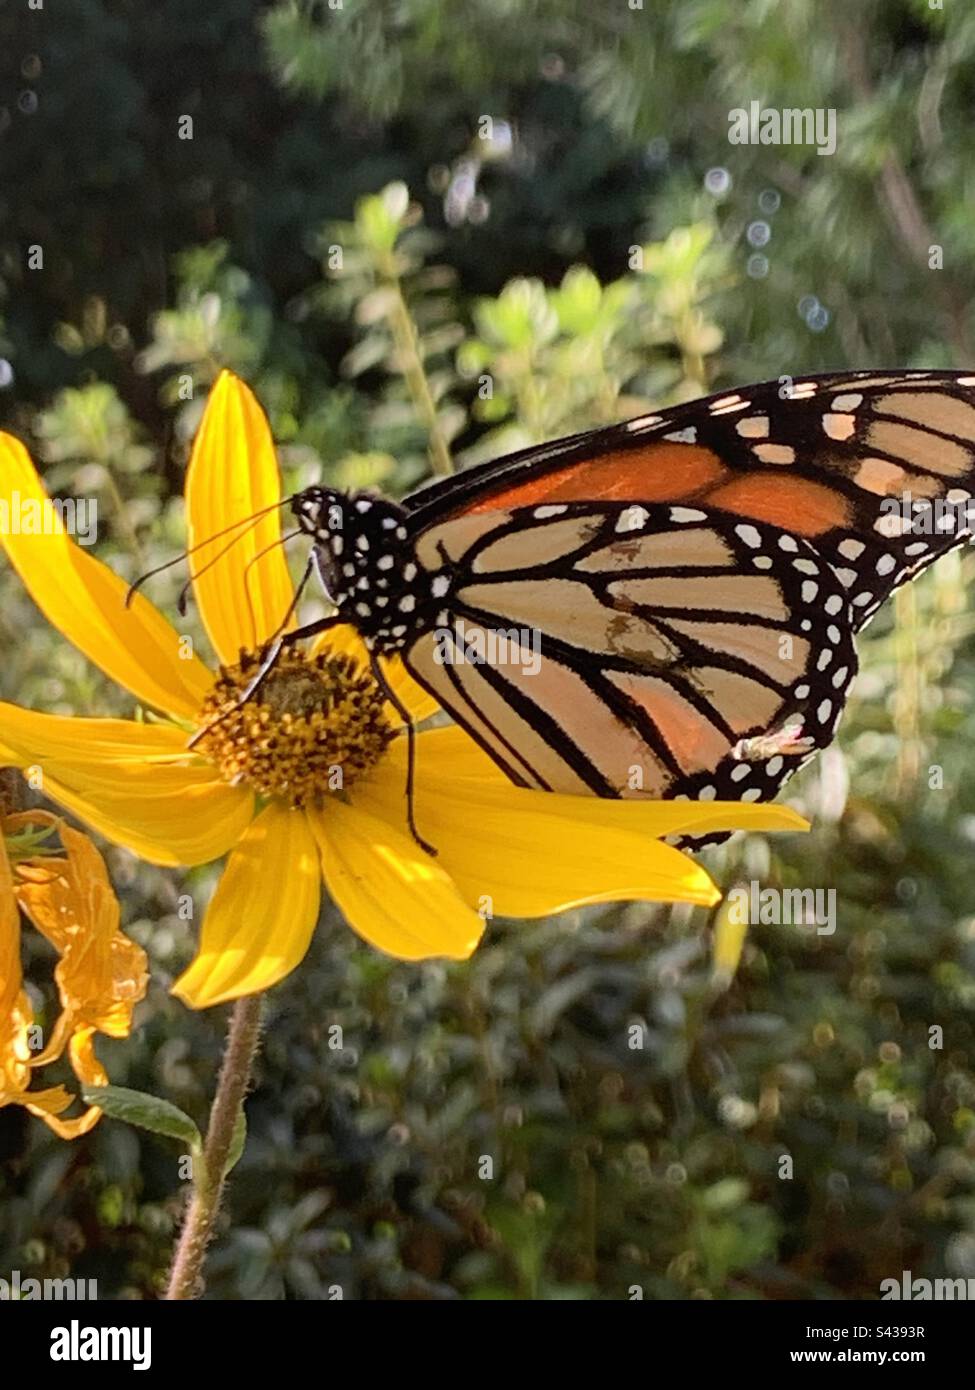 Monarch butterfly setting on a swamp Daisy Stock Photo